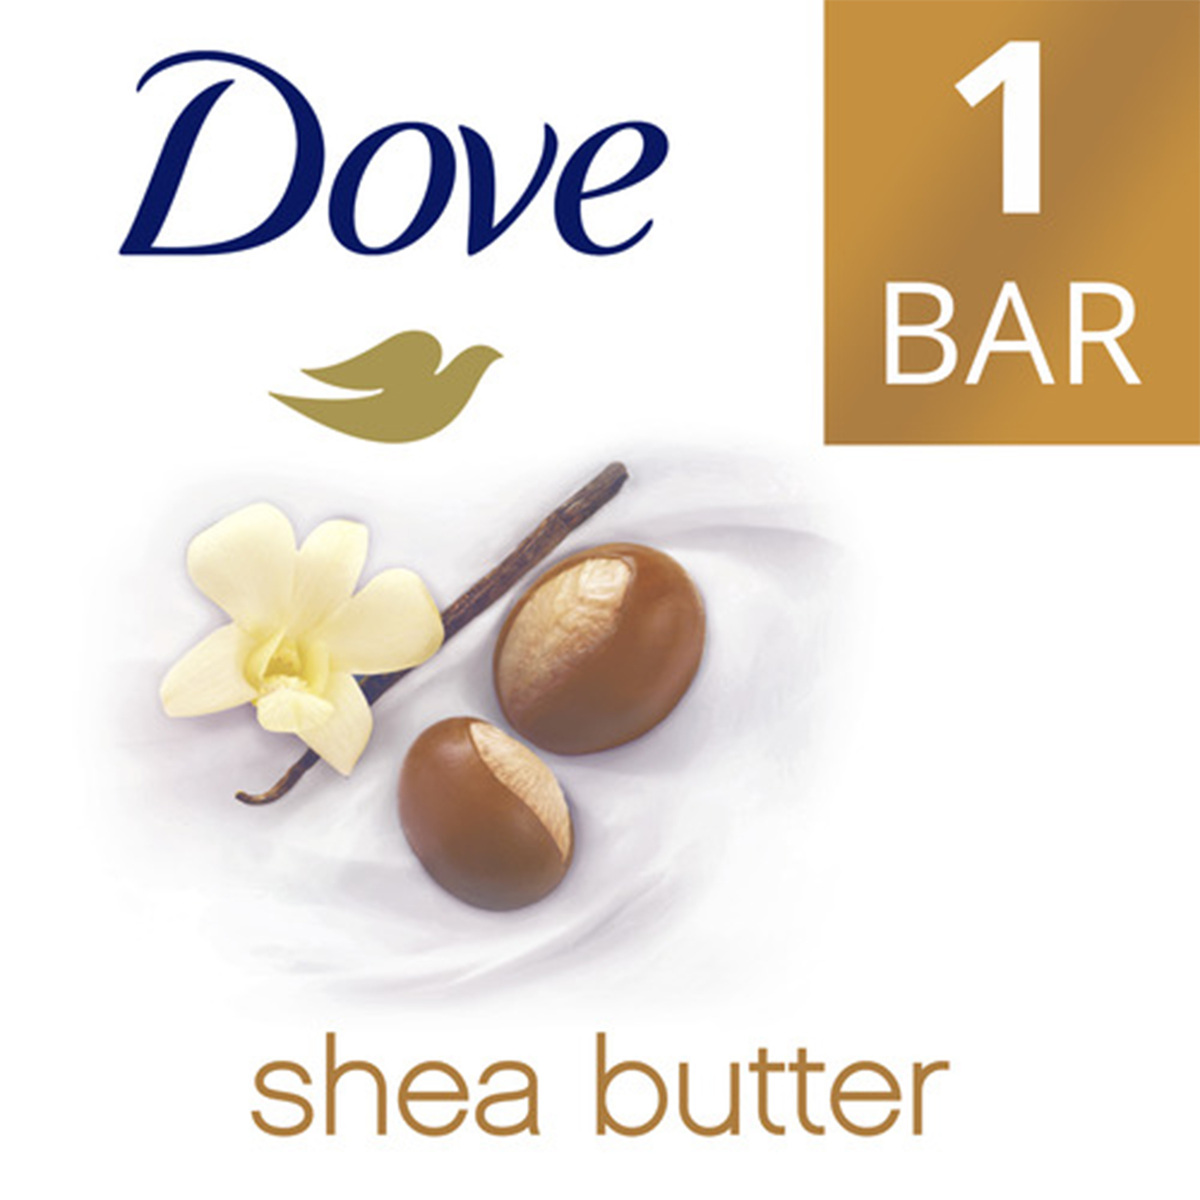 Dove Purely Pampering Beauty Cream Bar Shea Butter 135 g